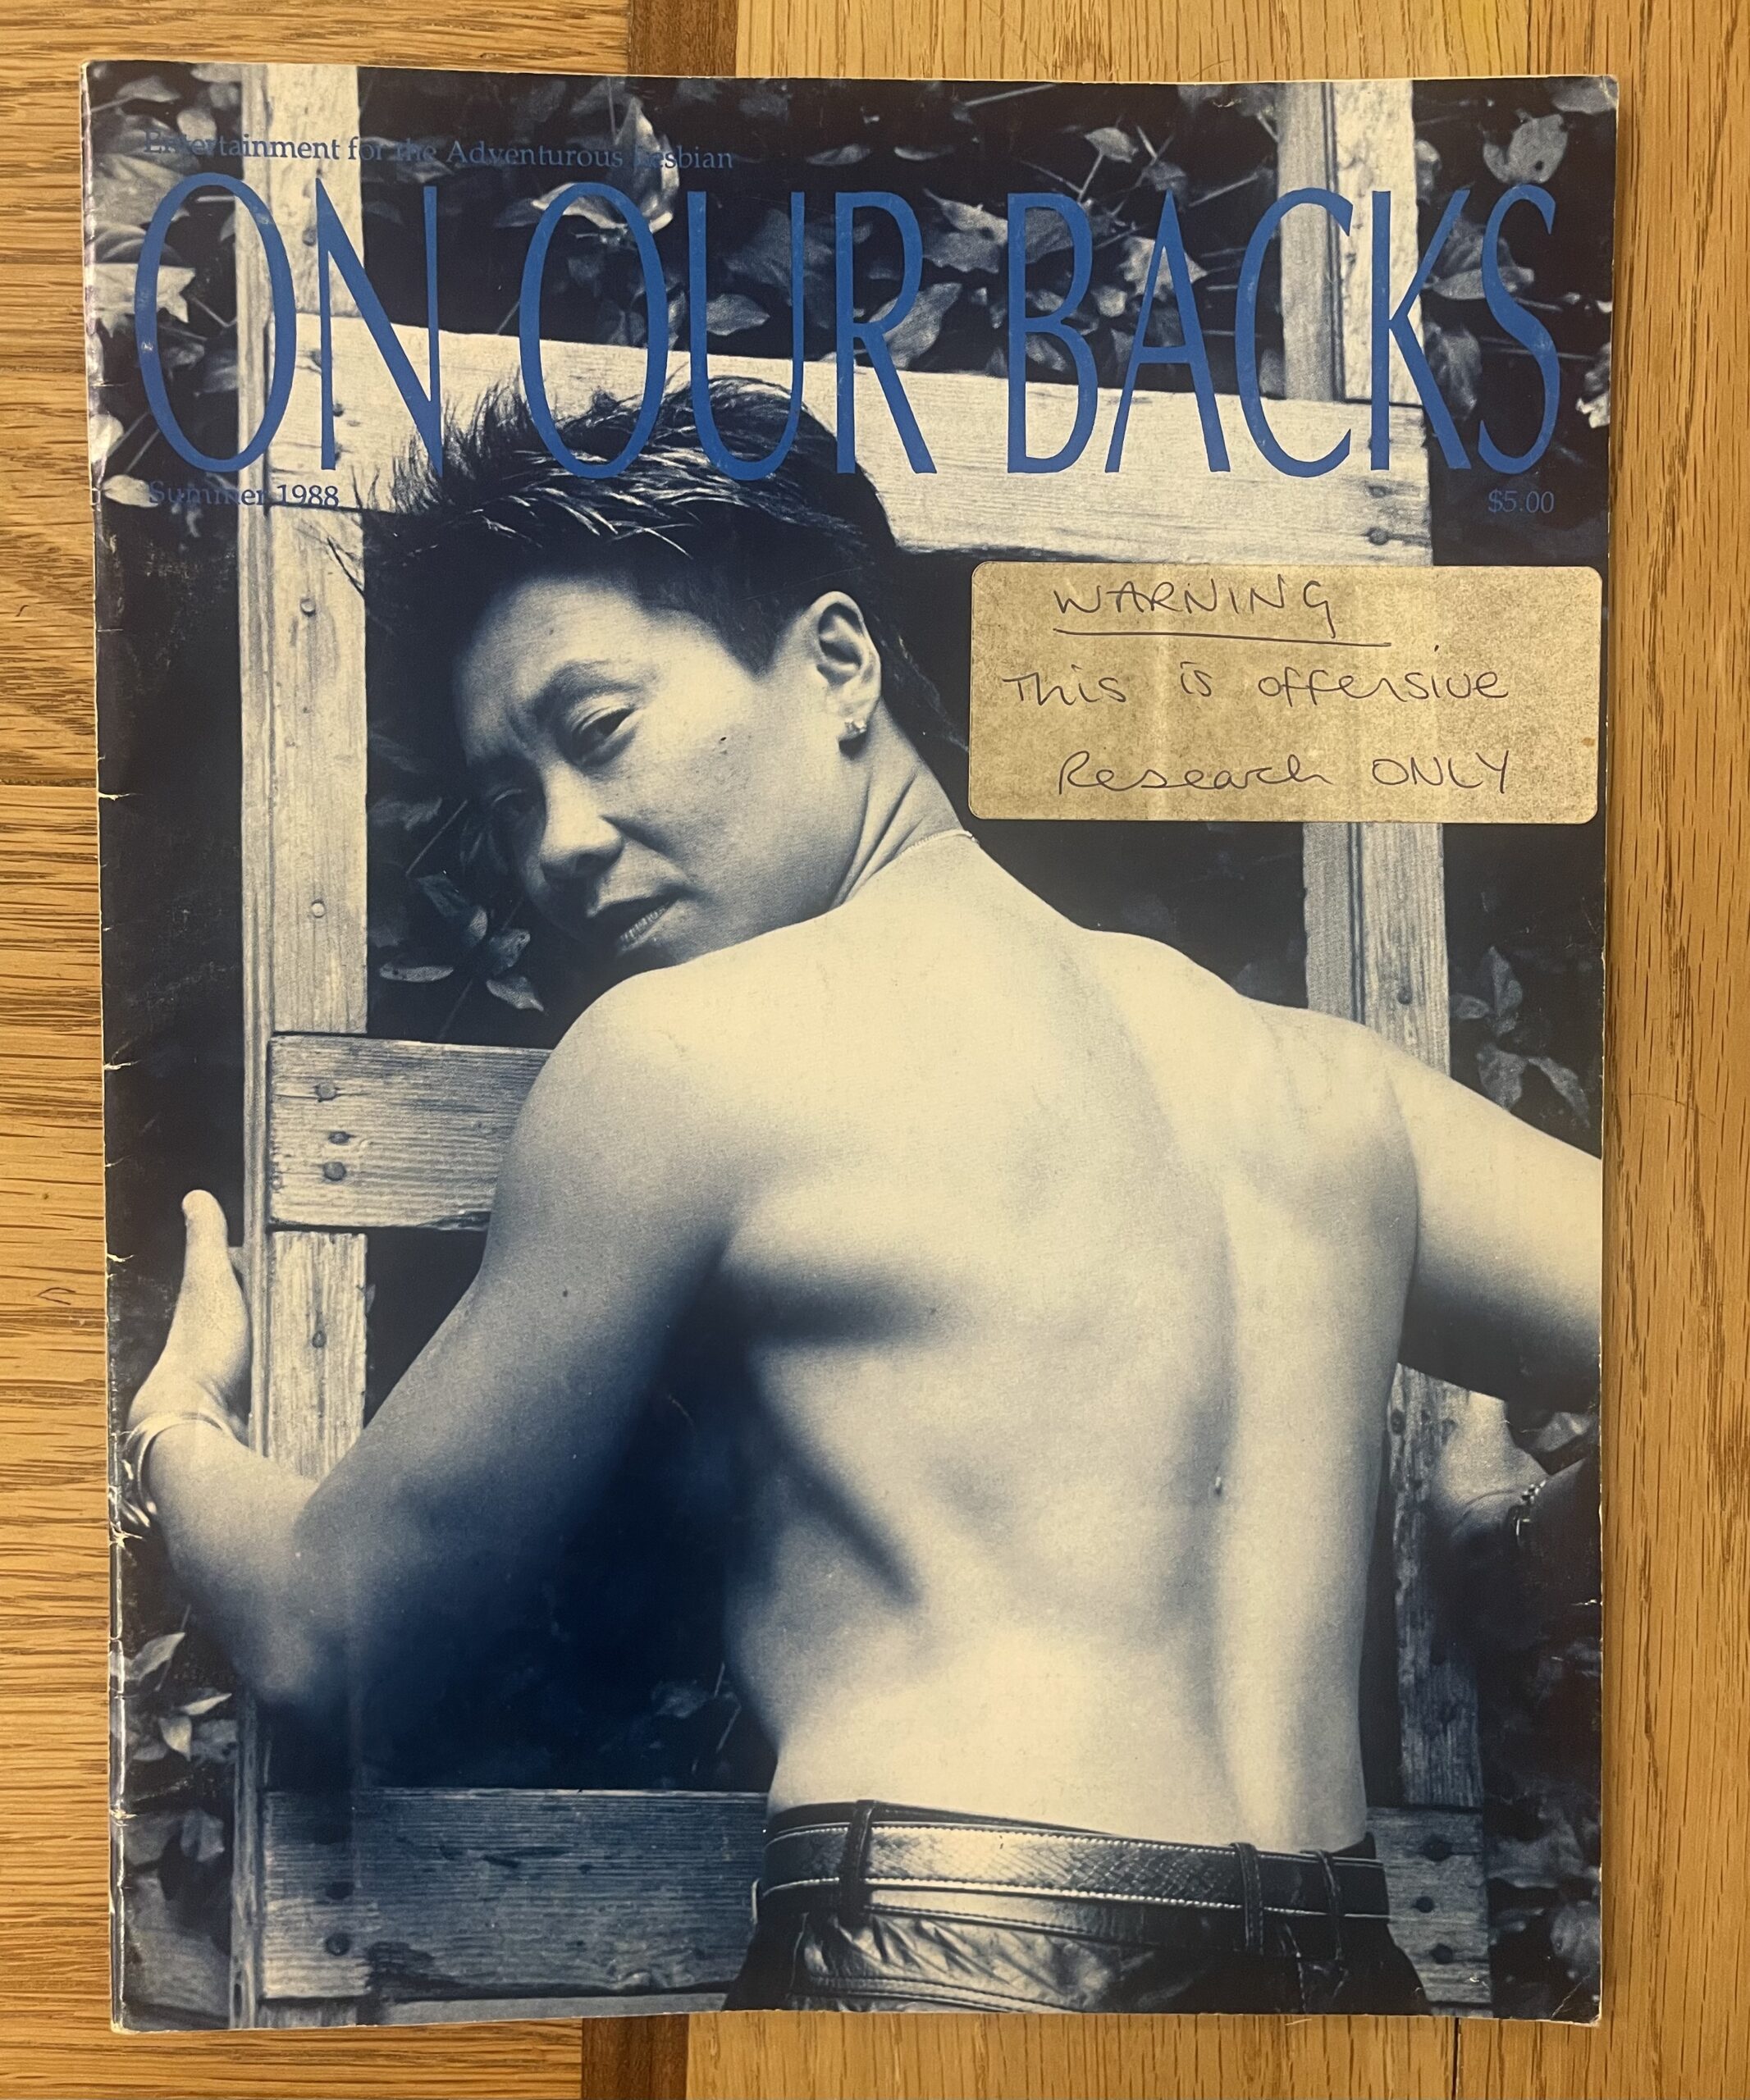 Cover of On Our Backs magazine from the GWL archive. The cover is an image of a topless butch person looking over their shoulder. There is a label stuck to the magazine cover that reads: Warning This is offensive, Research ONLY